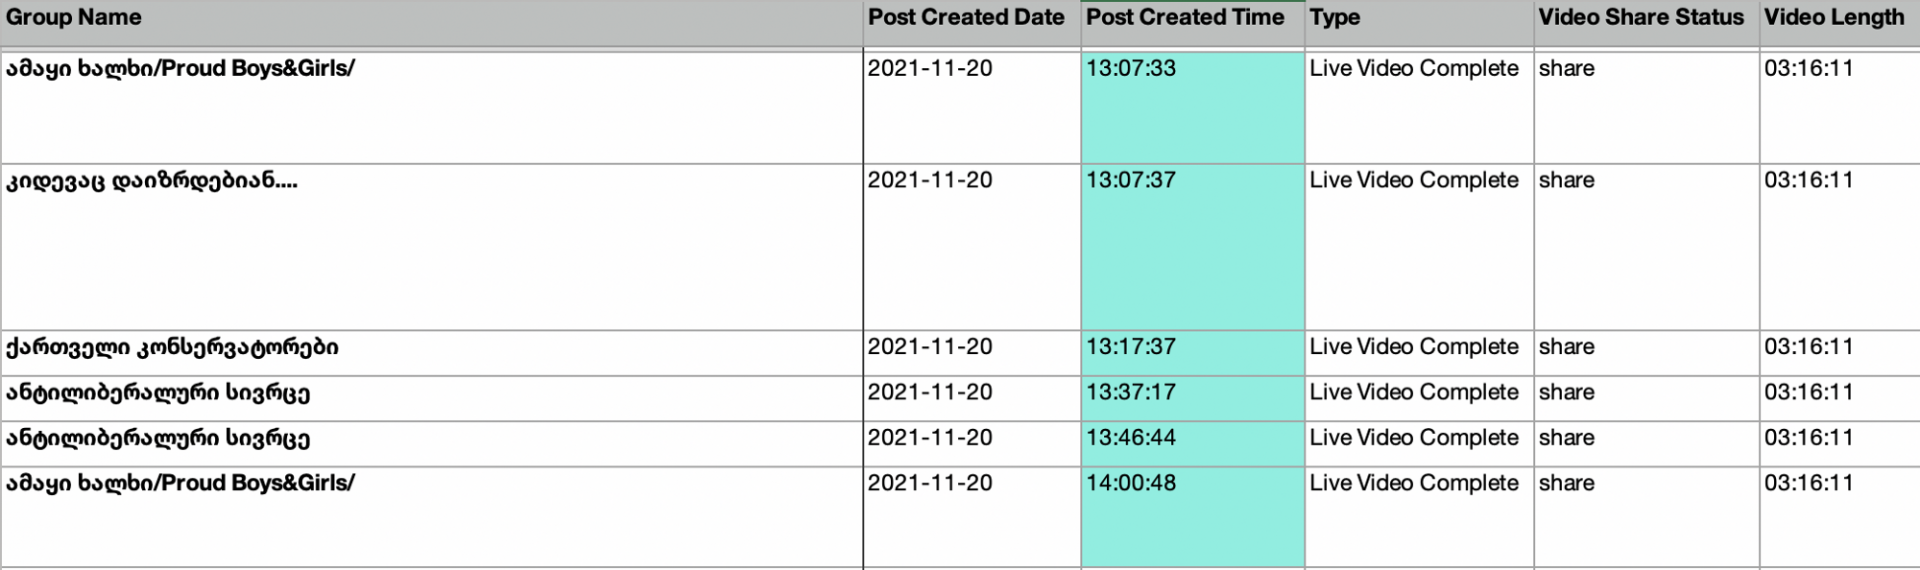 Table showing the dates and times at which user accounts posted the same live video from Conservative Movement’s constituent congress into groups within the same hour period. 